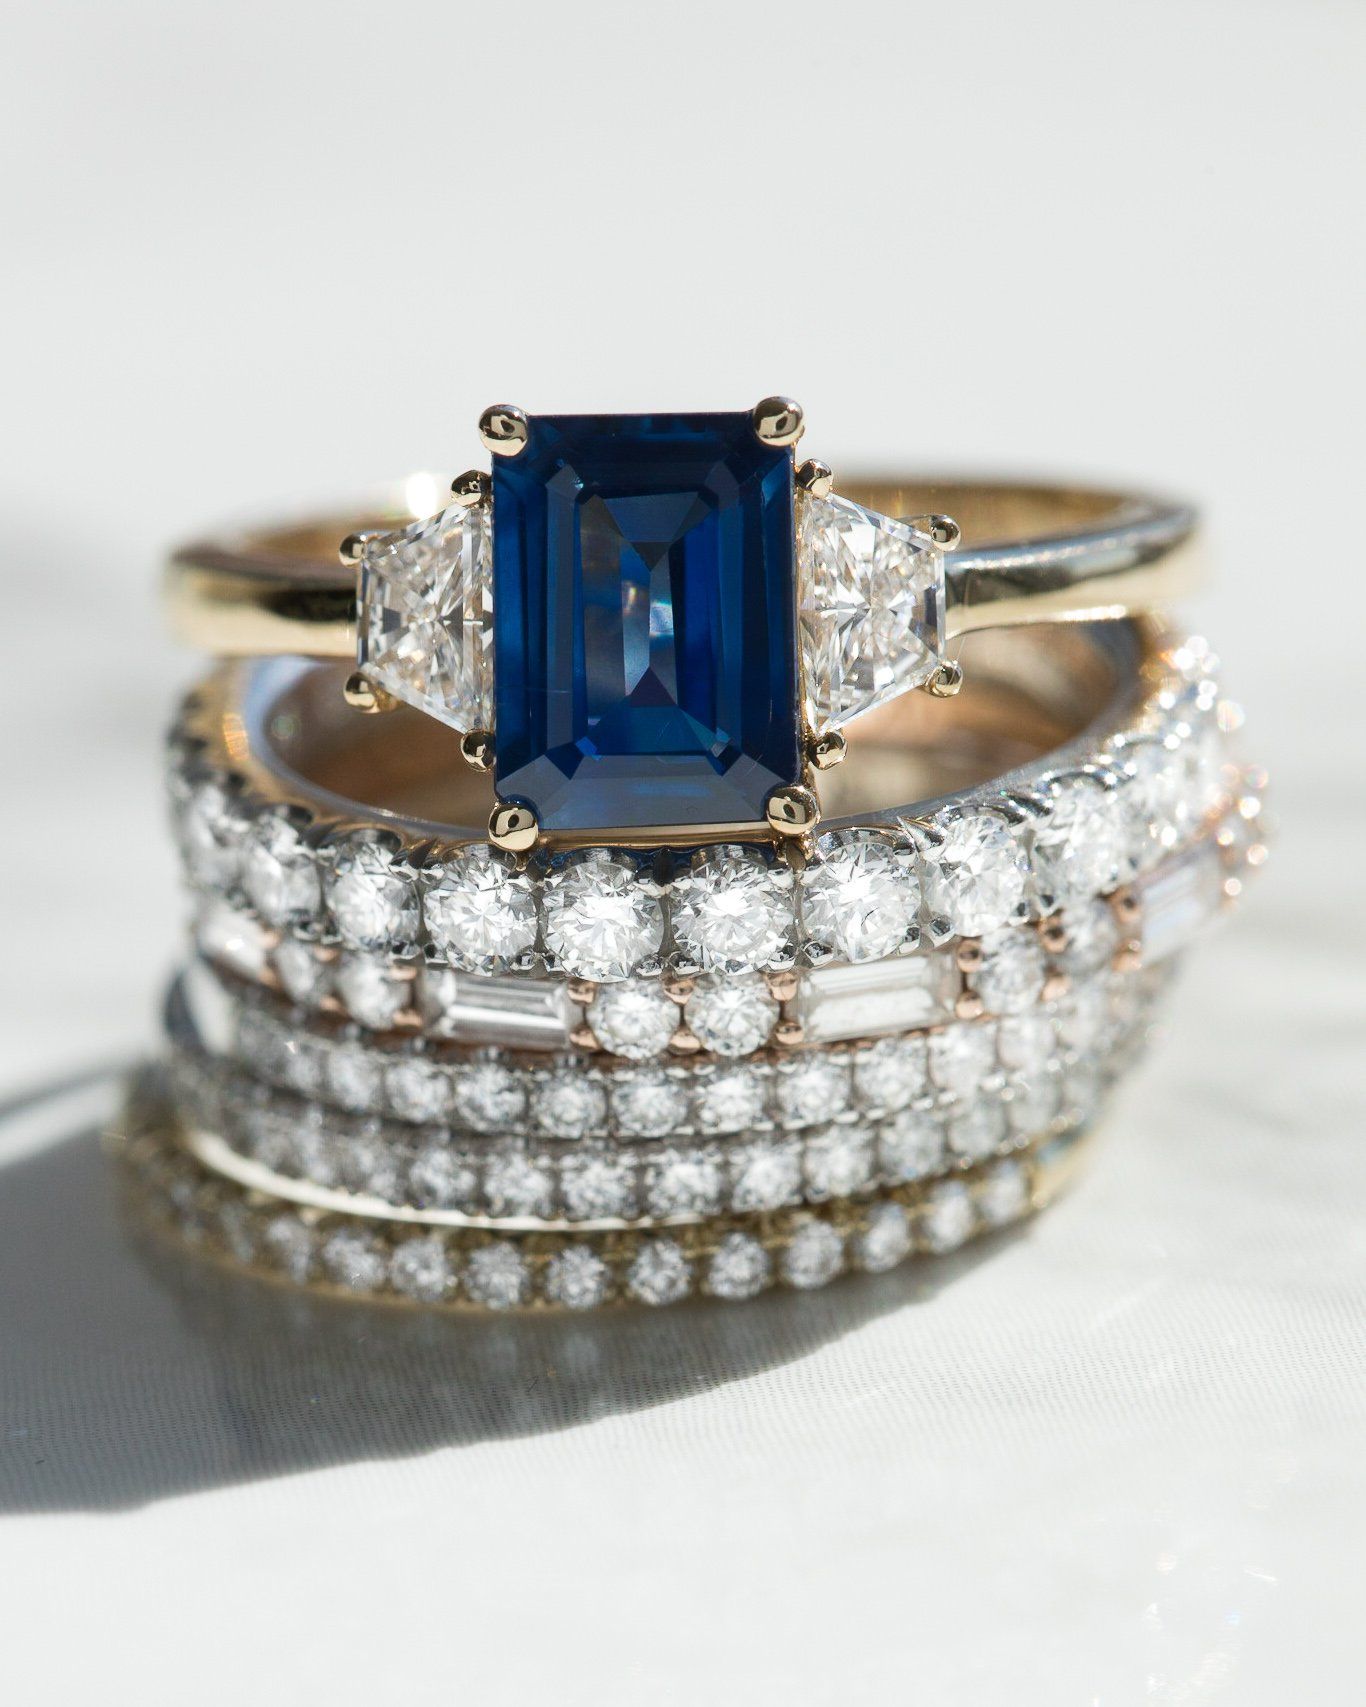 Sapphire Emerald Cut With Trapezoid Side Stone Engagement Ring by Good Stone in Yellow Gold